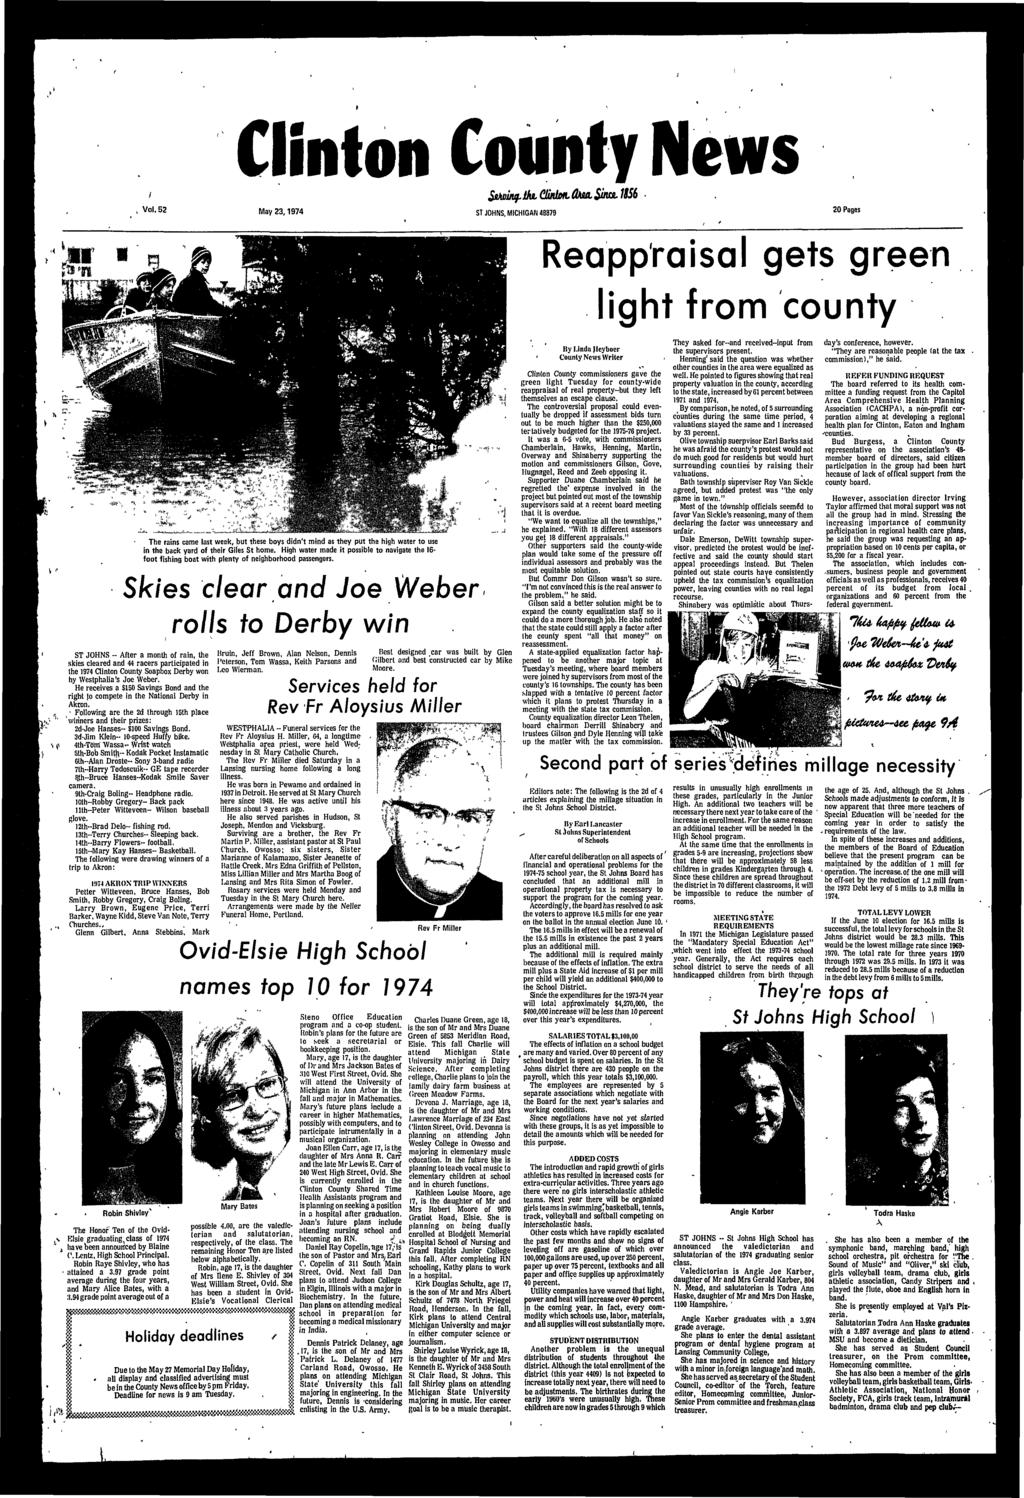 1 Clnton County News /, Vol.52 May 23,1974 ST JOHNS, MICHIGAN 48879 20 Pages -.